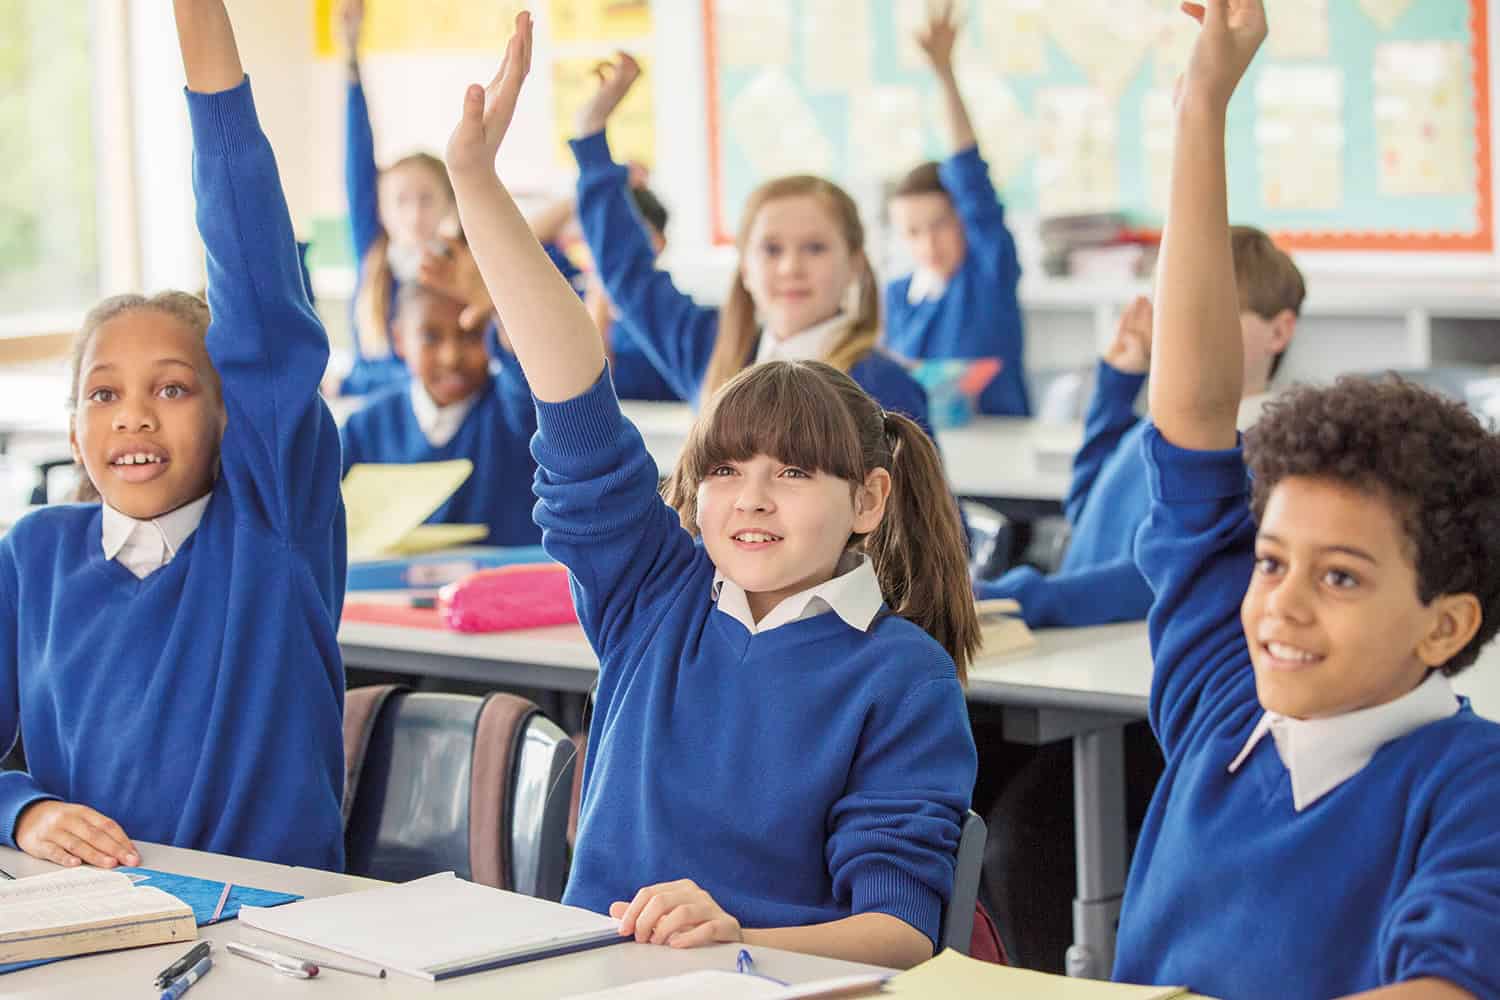 A classroom of pupils with their hands up in the air.